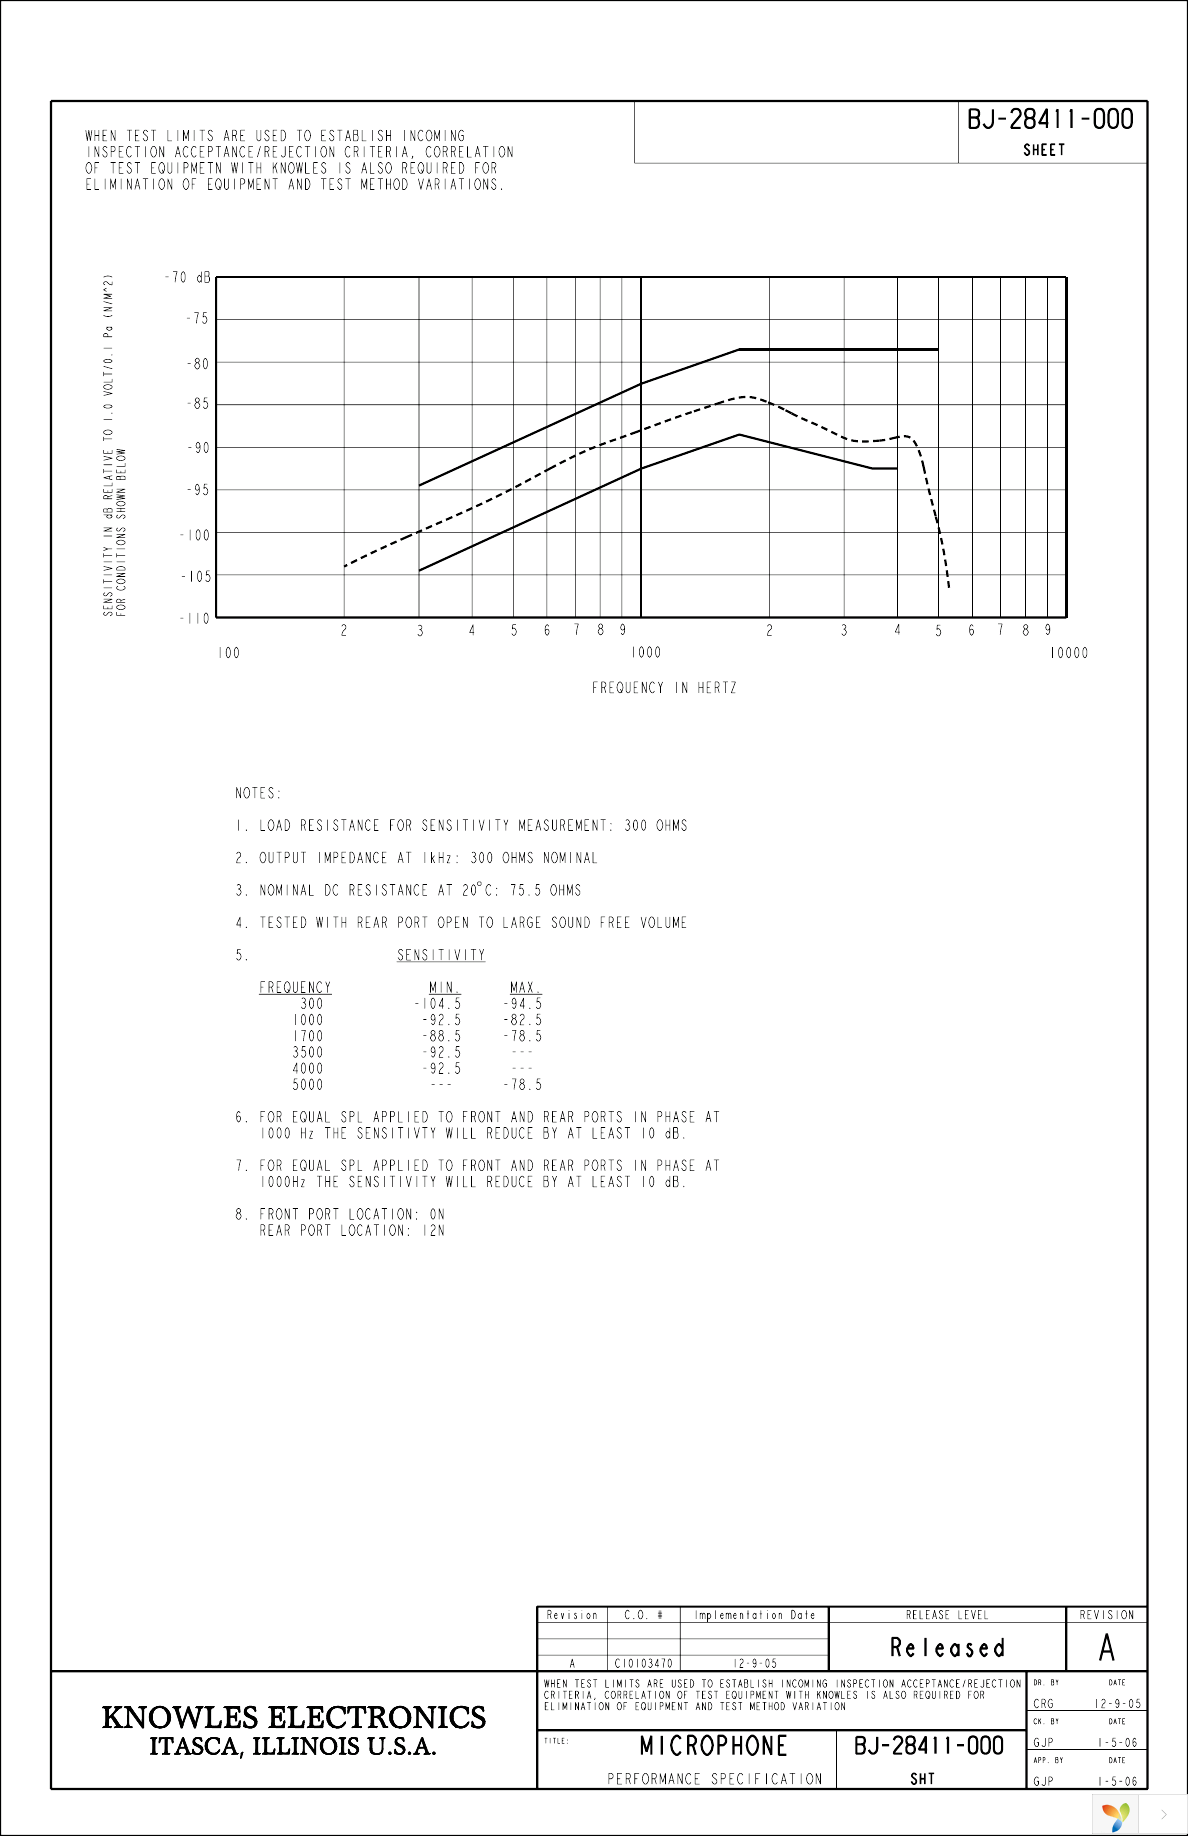 BJ-28411-000 Page 2